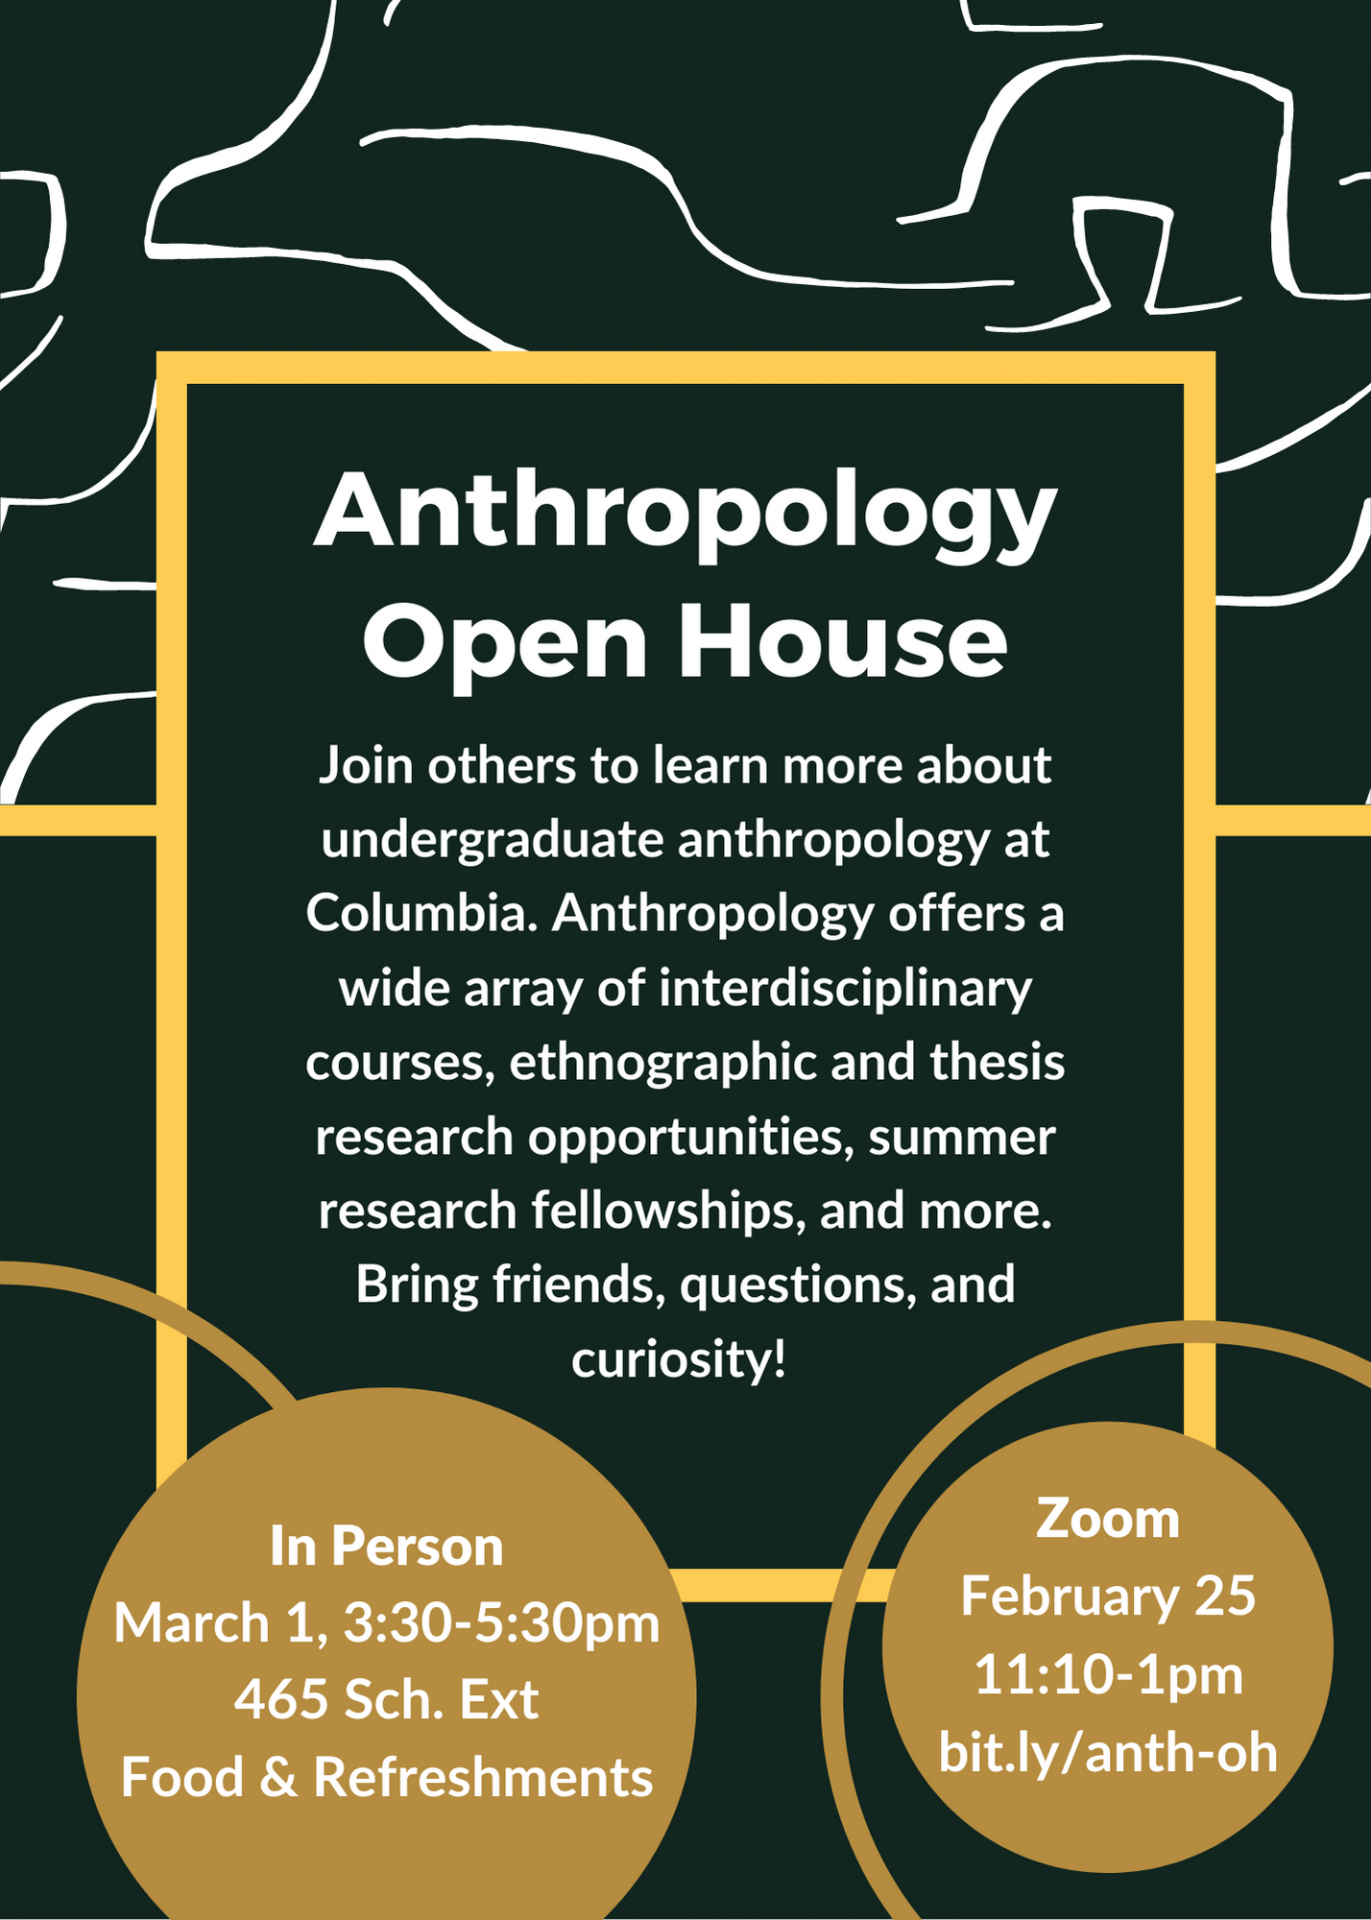 Anthropology Open House Flyer